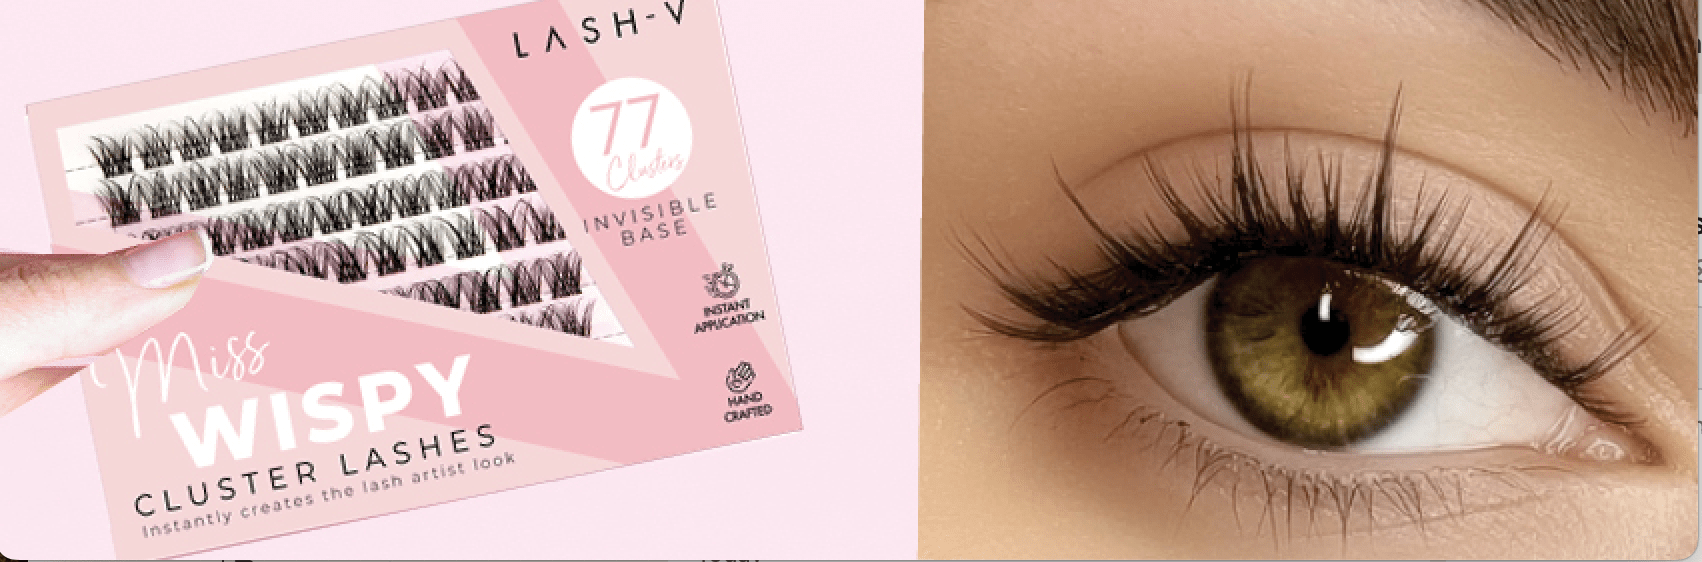 How to provide a 15 minute lash service and triple your daily appointments. - LASH V